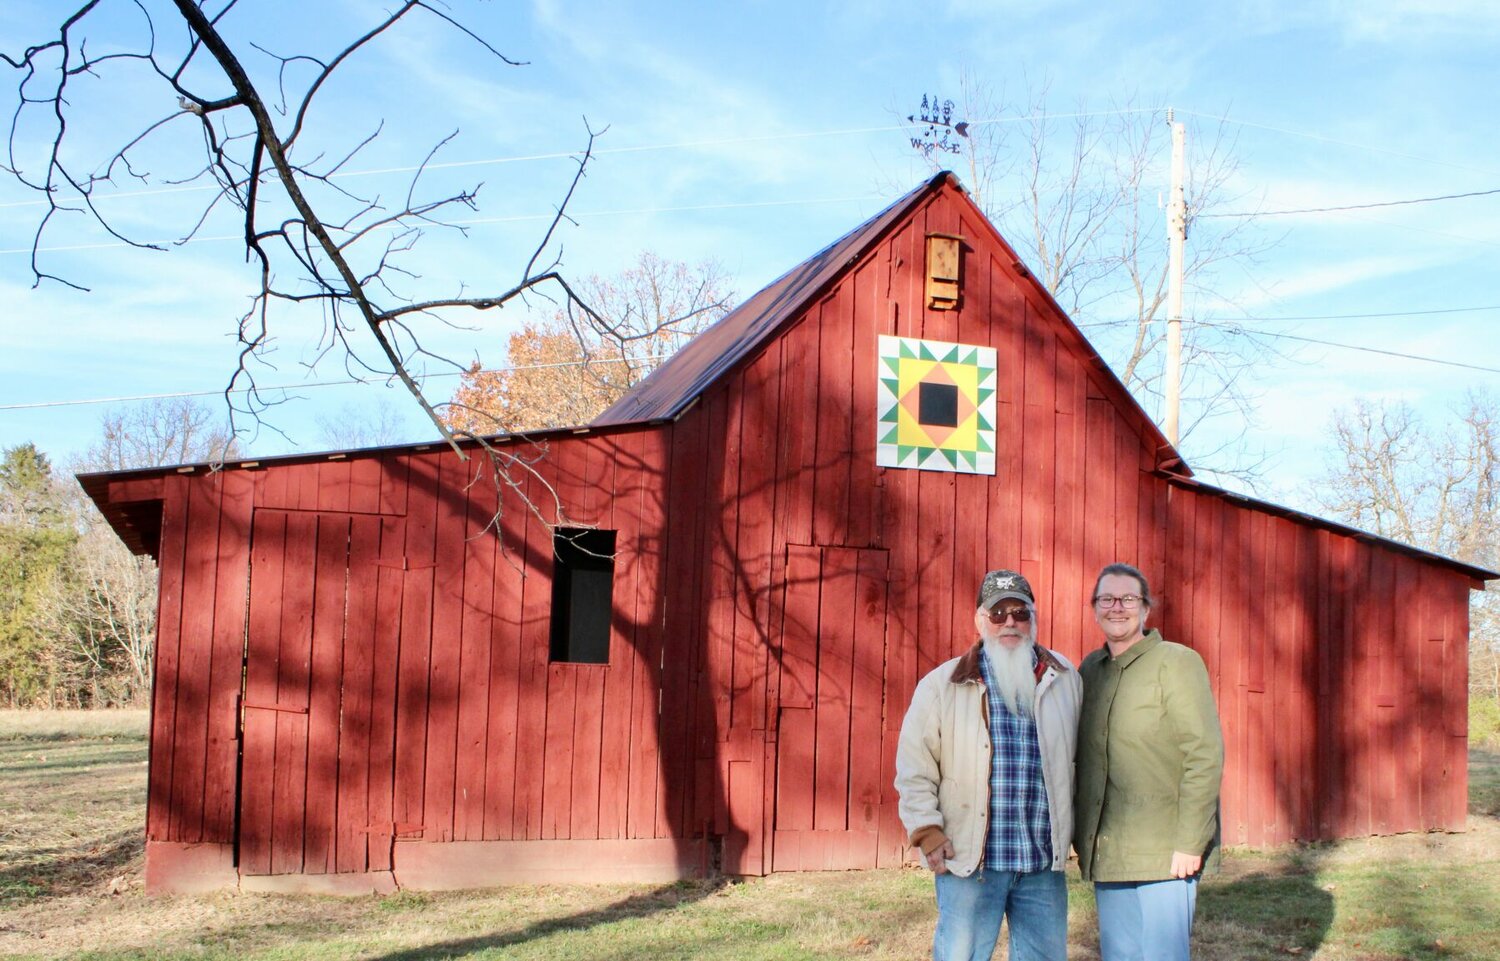 James and Jessica Brimsberry pose in front of barn on the 3-acre property they own near the corner of Gleghorn Street and Christopher Drive just inside West Plains city limits. James is retired and Jessica works from home with a company based in Green Bay, Wisc. Jessica painted the sunflower barn quilt hanging on the side, and the two have been busy renovating and restoring the property and its outbuildings.